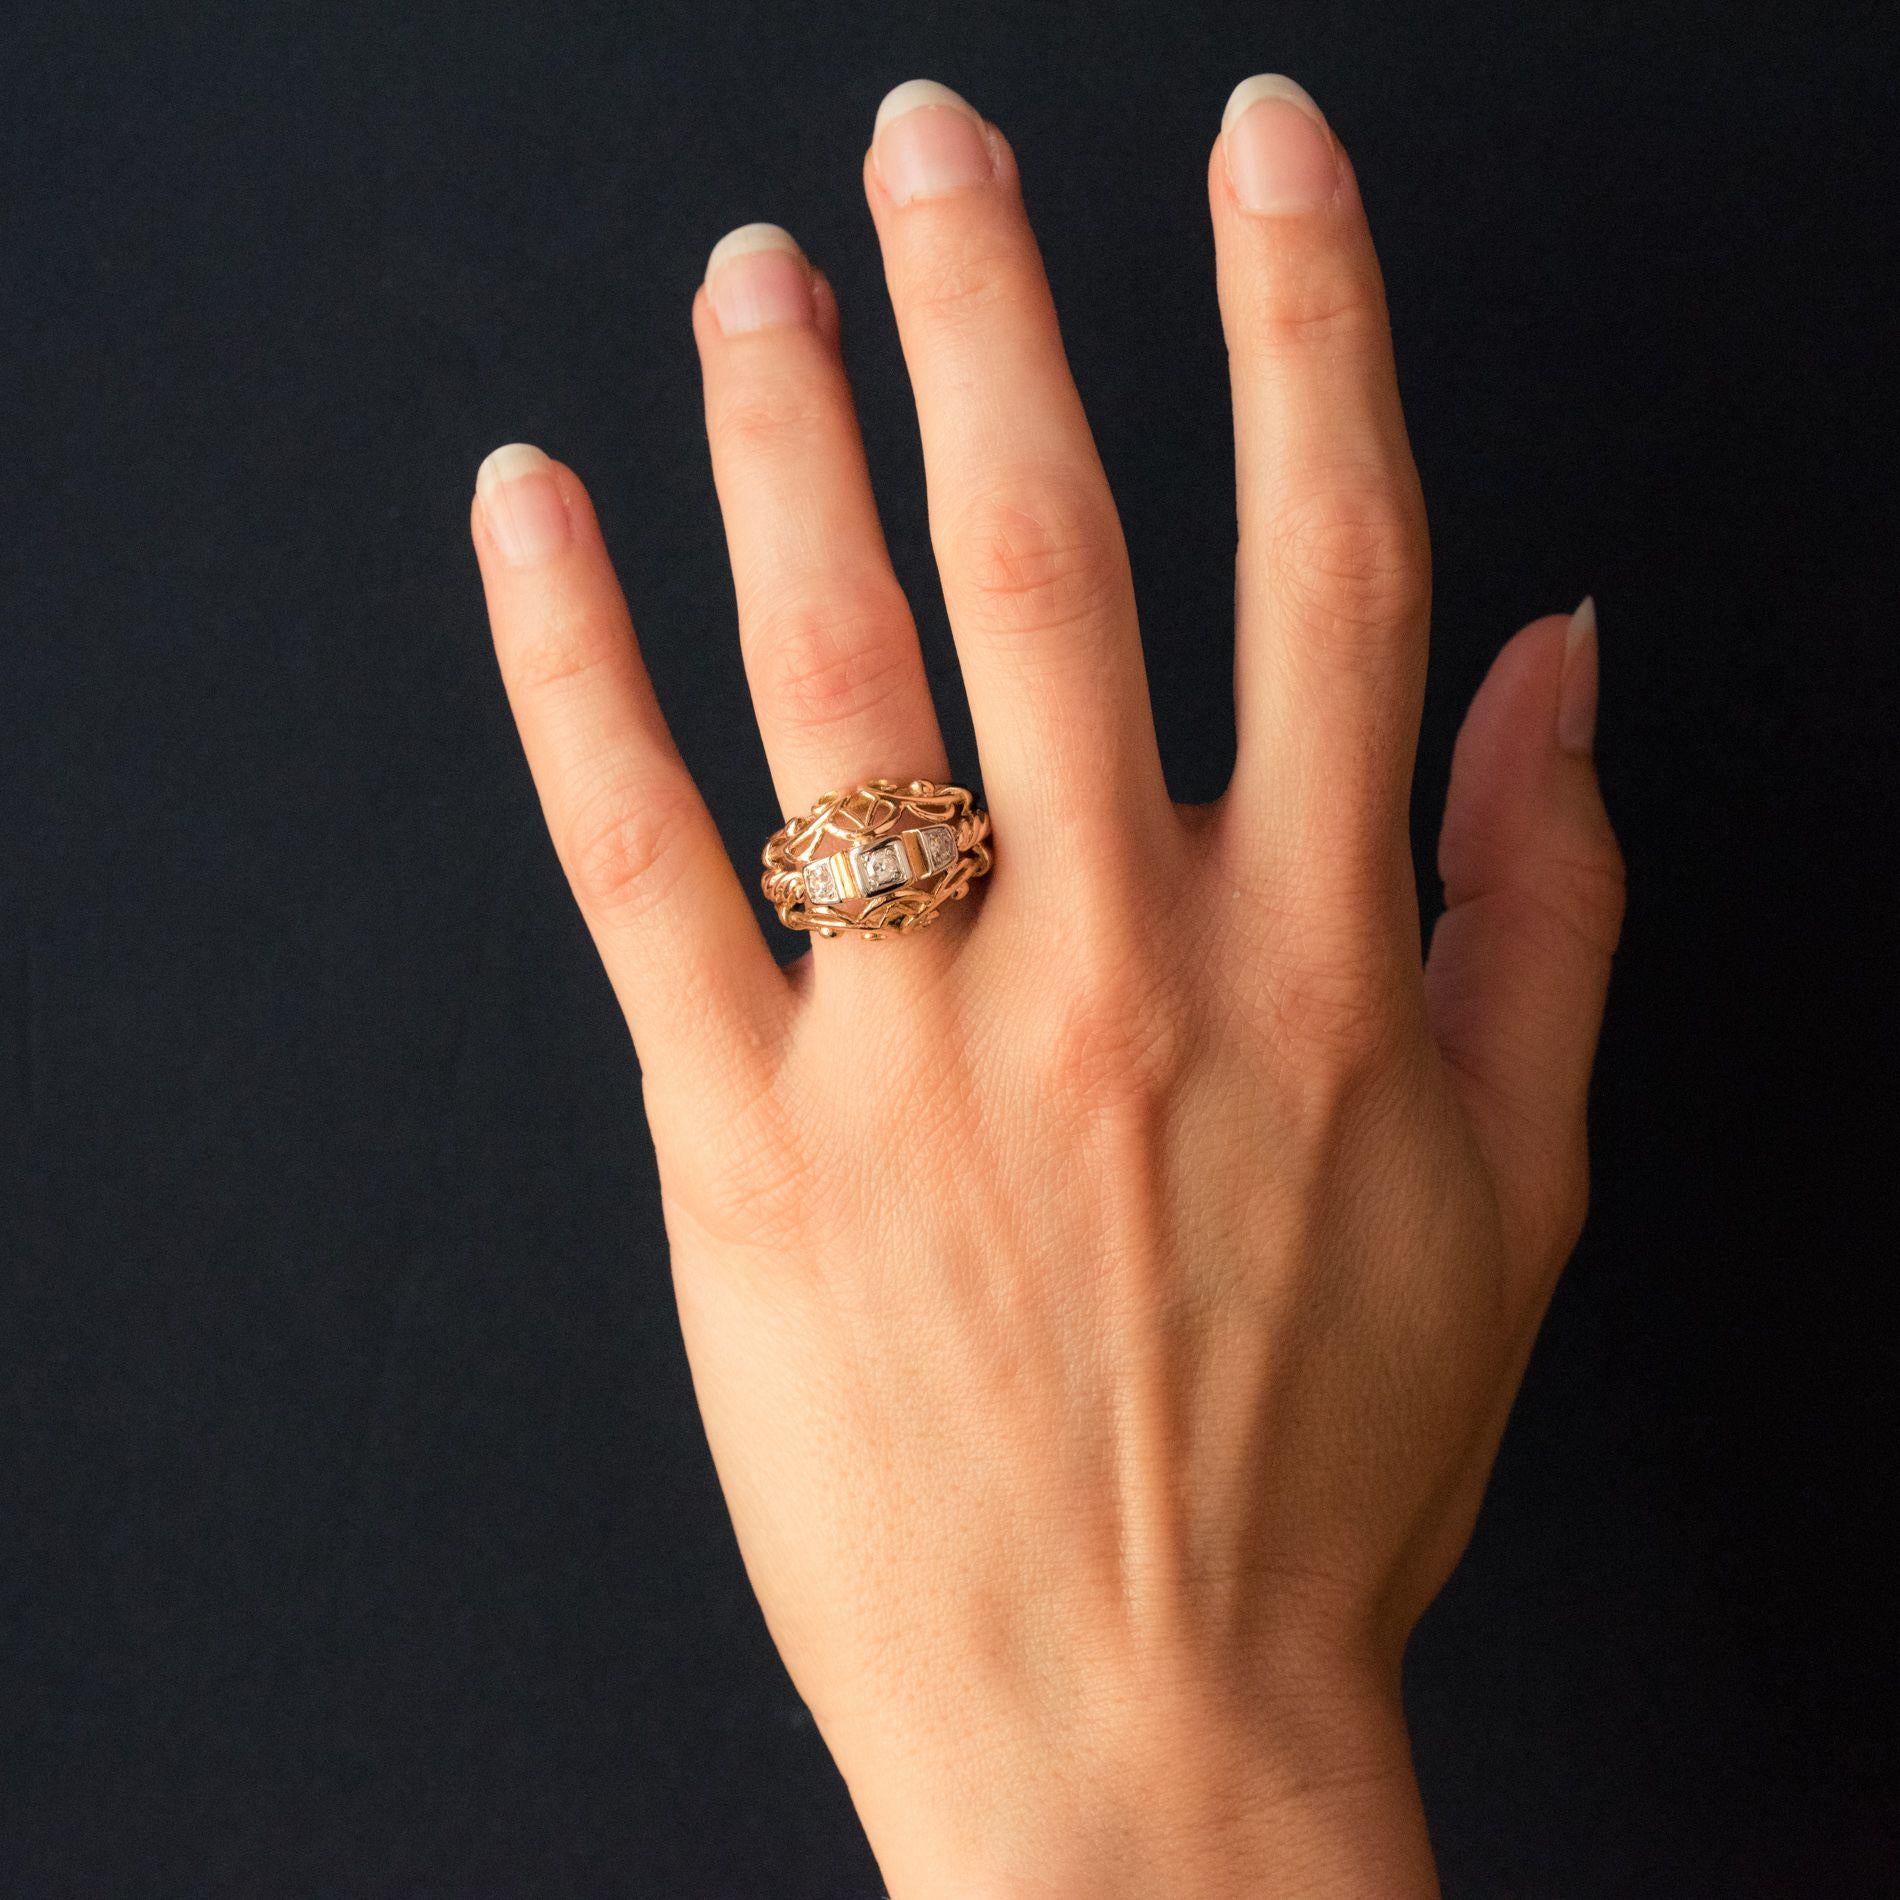 Ring in 18 karat rose gold. 
This splendid antique domed ring is composed of gold strands that are smooth, twisted and entwined with 3 diamonds set at the heart of a geometric design. 
Total diamond weight: about 0.20 carat.
Height: 1.45 cm,